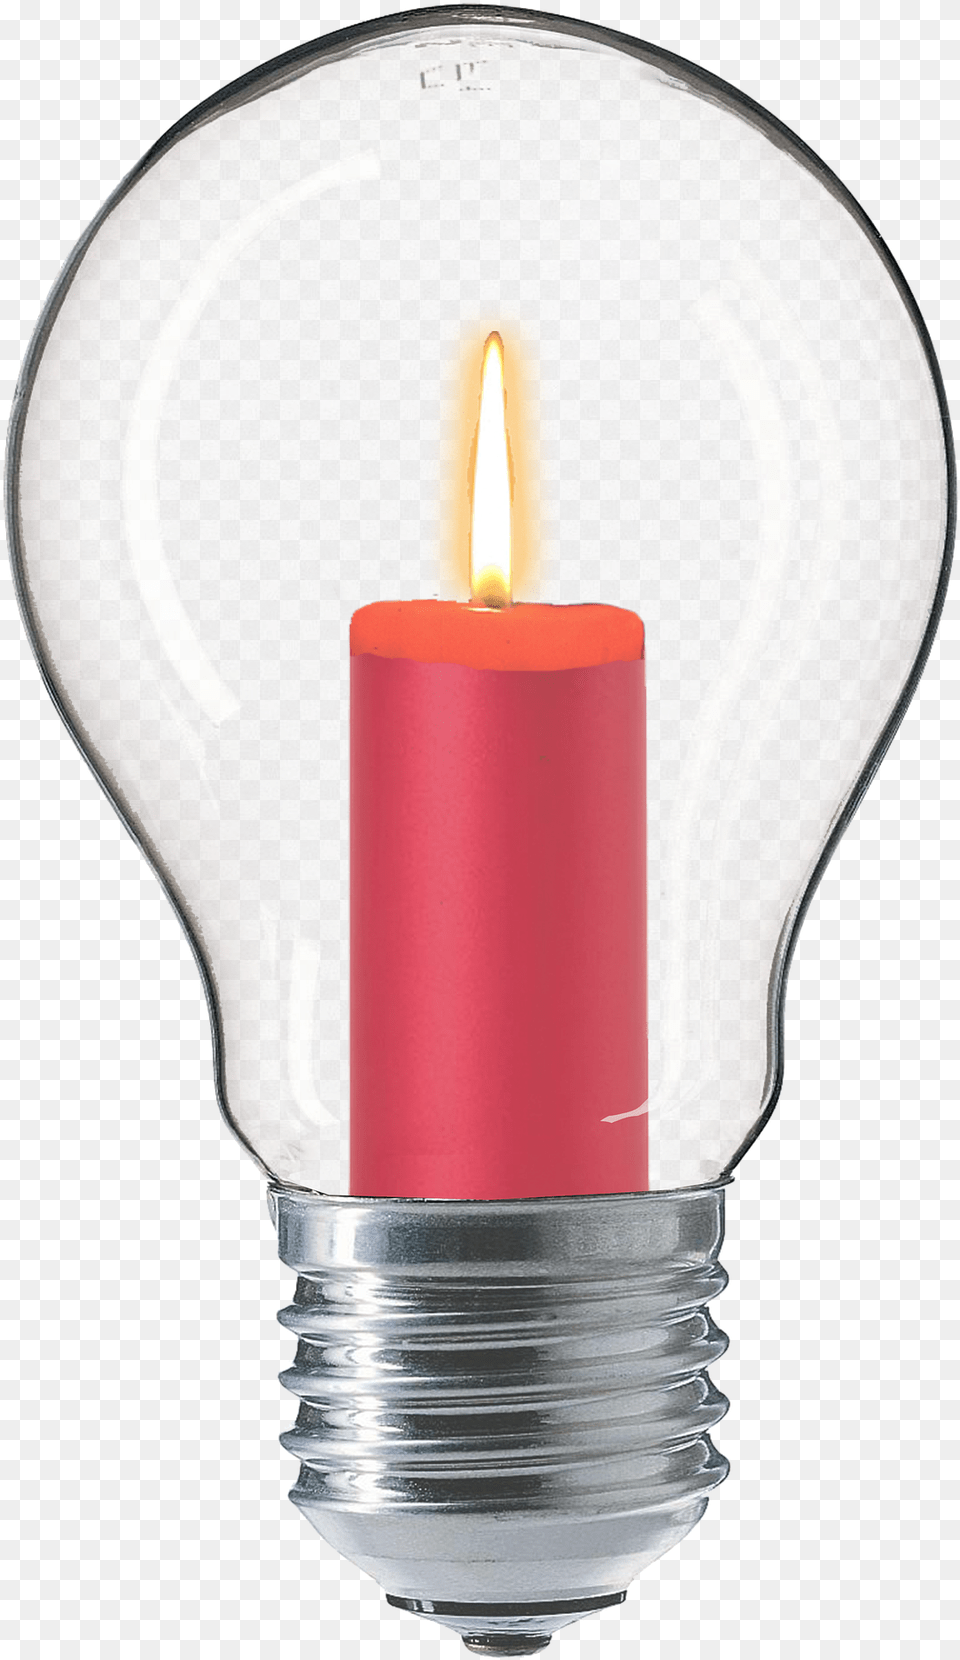 Download Incandescent Light Bulb Image With No, Candle, Lightbulb Png